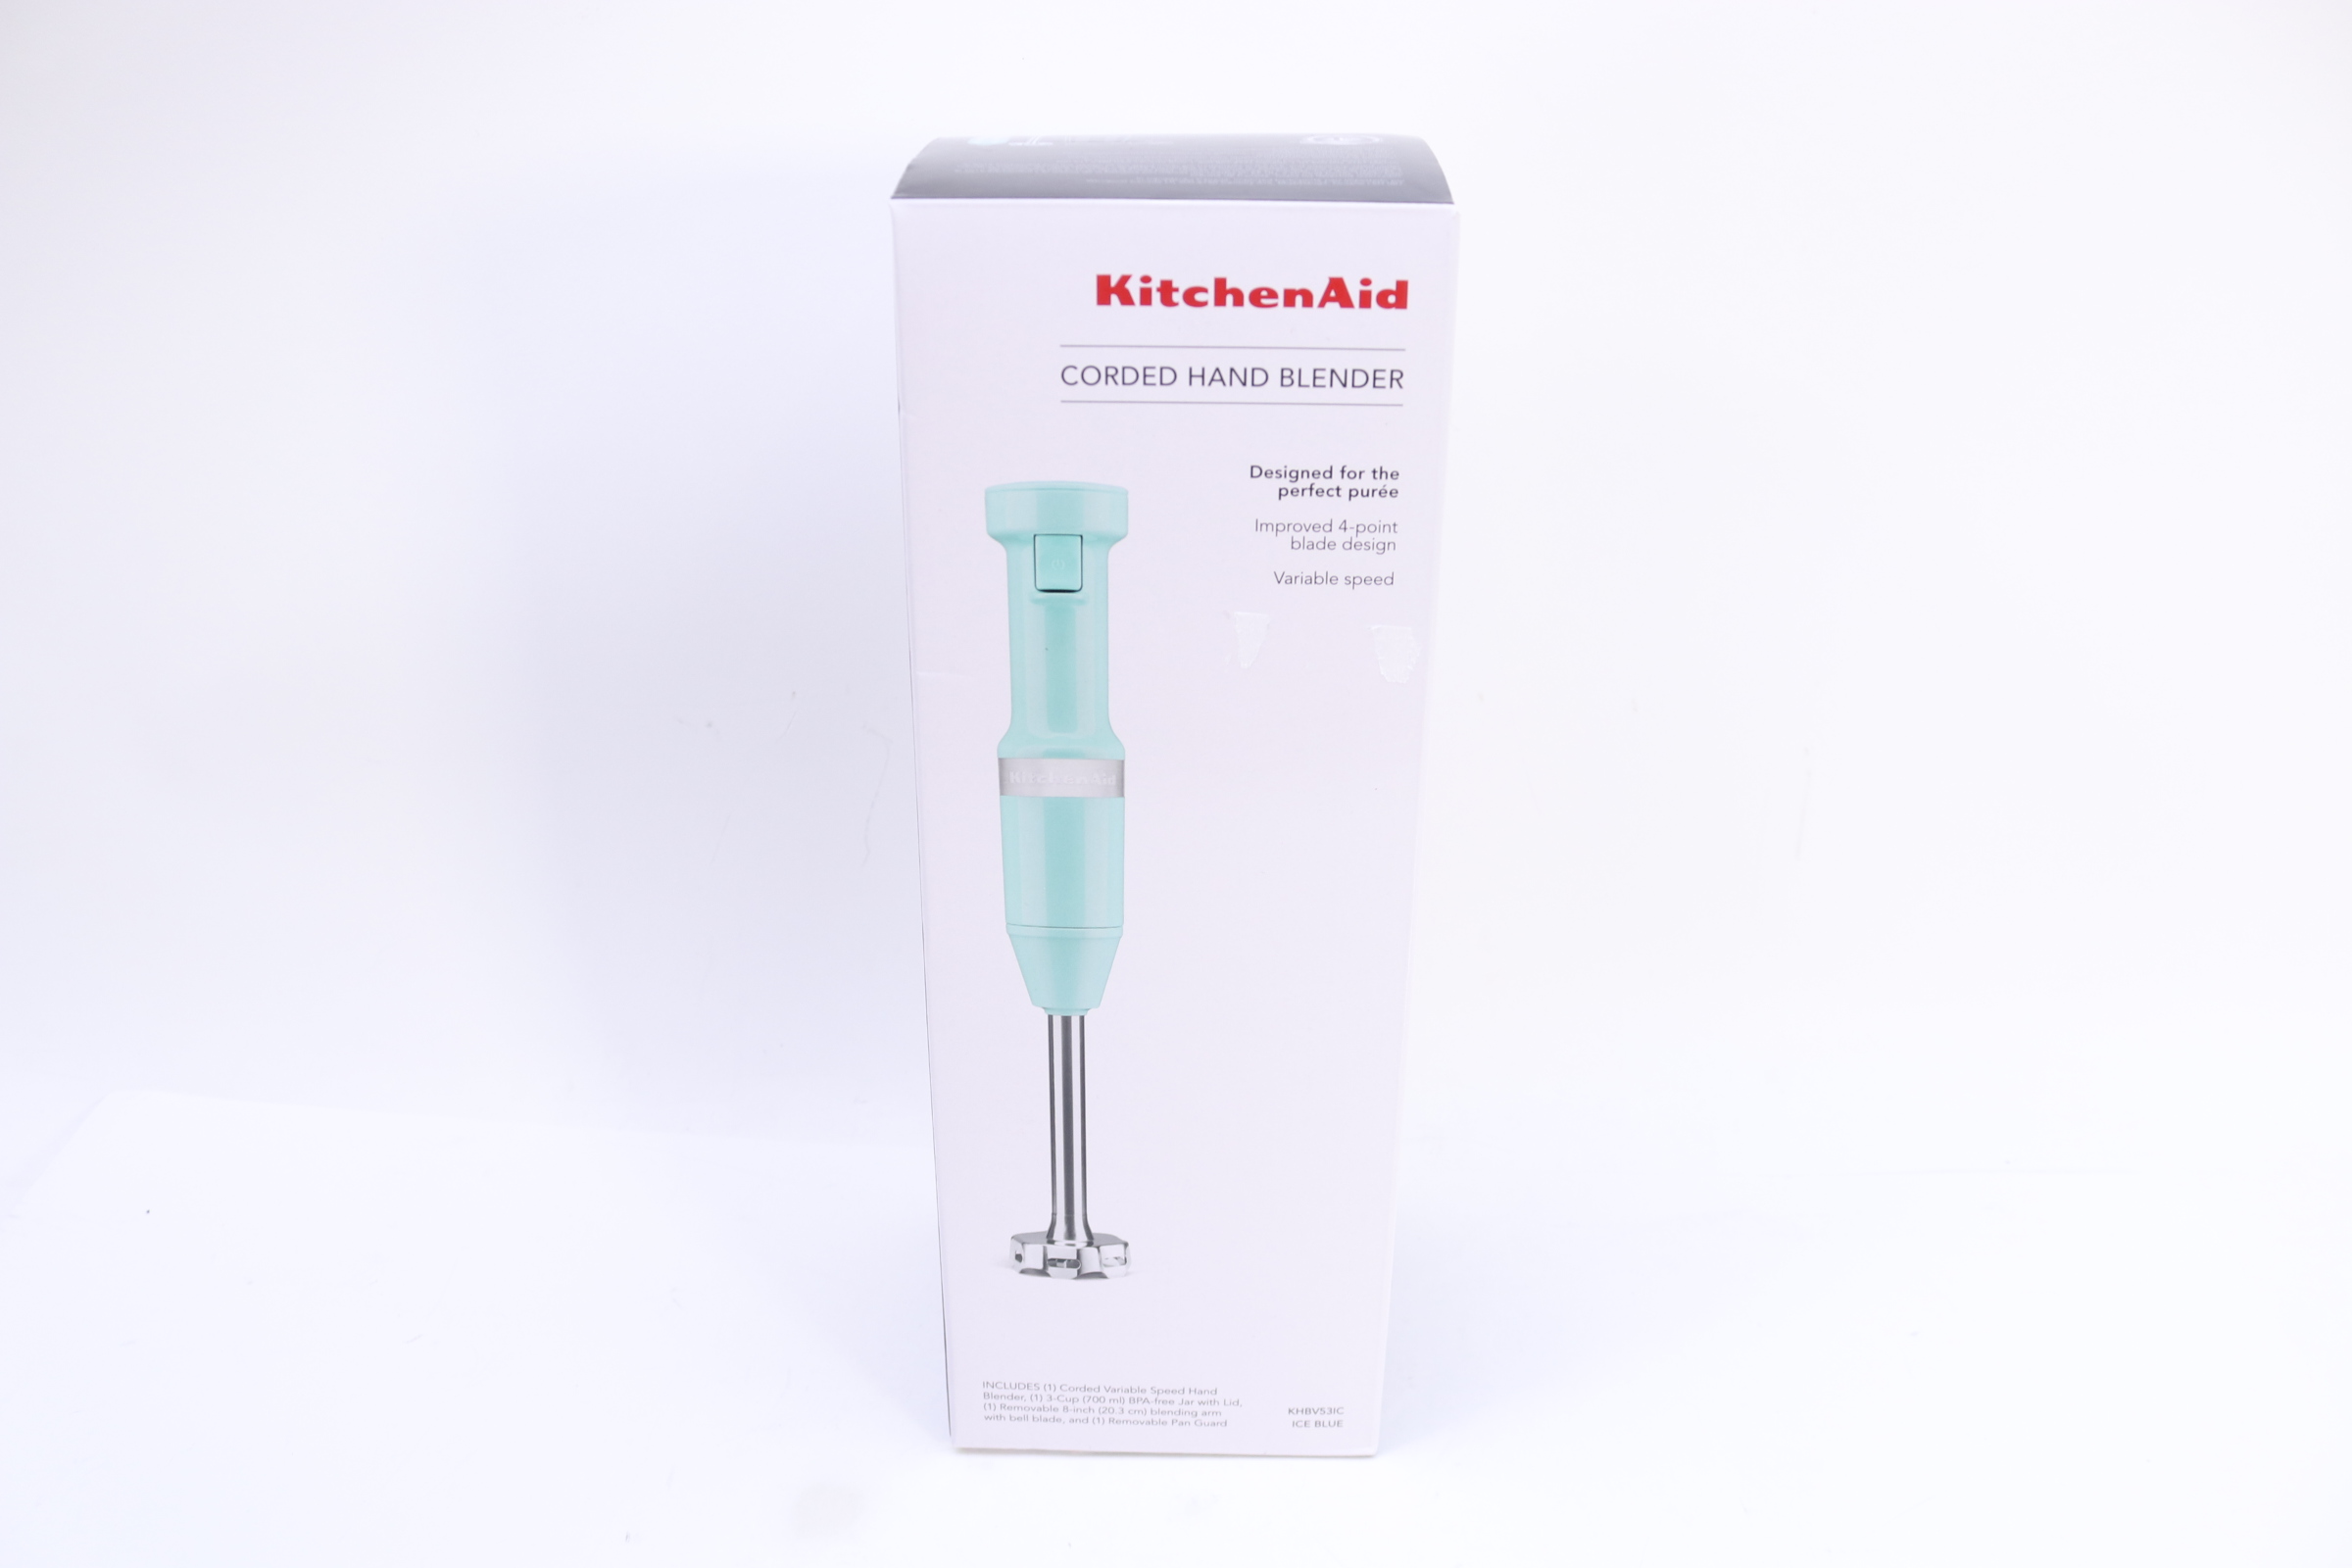 KHBV53IC by KitchenAid - Variable Speed Corded Hand Blender